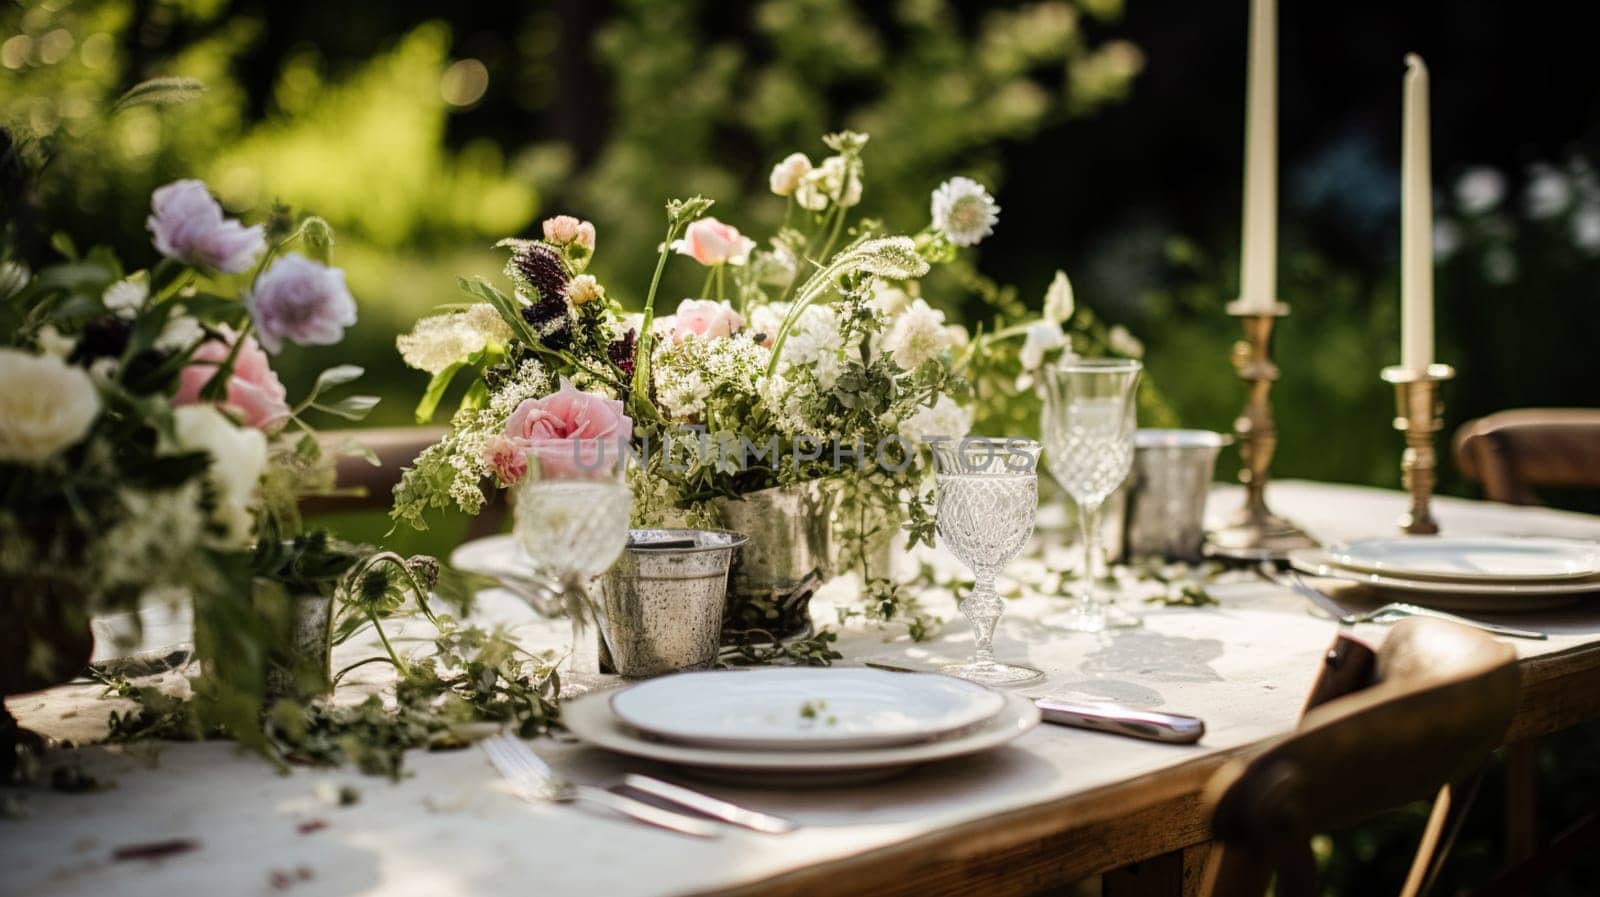 Table decor, holiday tablescape and dinner table setting in countryside garden, formal event decoration for wedding, family celebration, English country and home styling inspiration